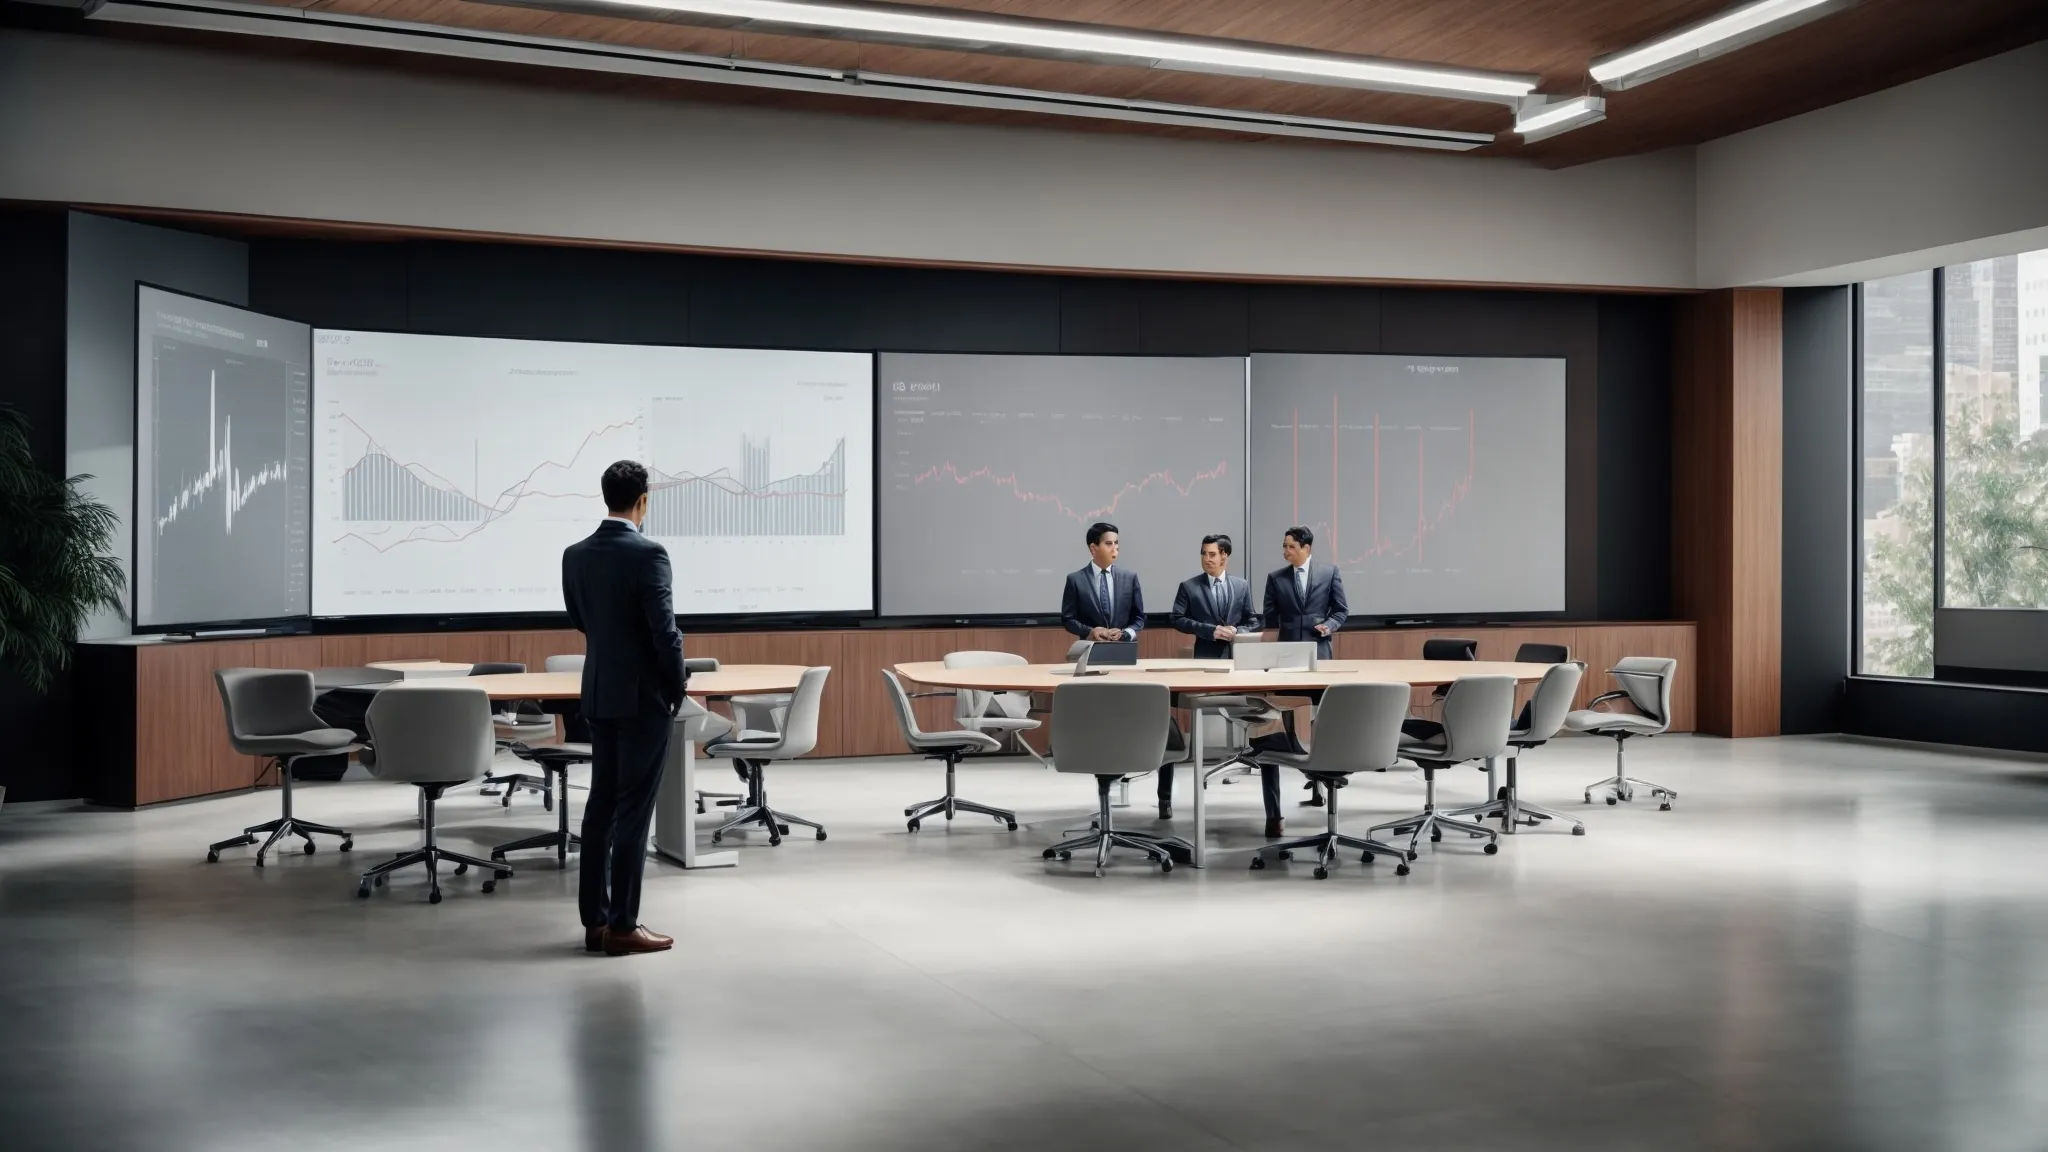 an office meeting room with a large screen displaying graphs and analytics while professionals listen attentively.